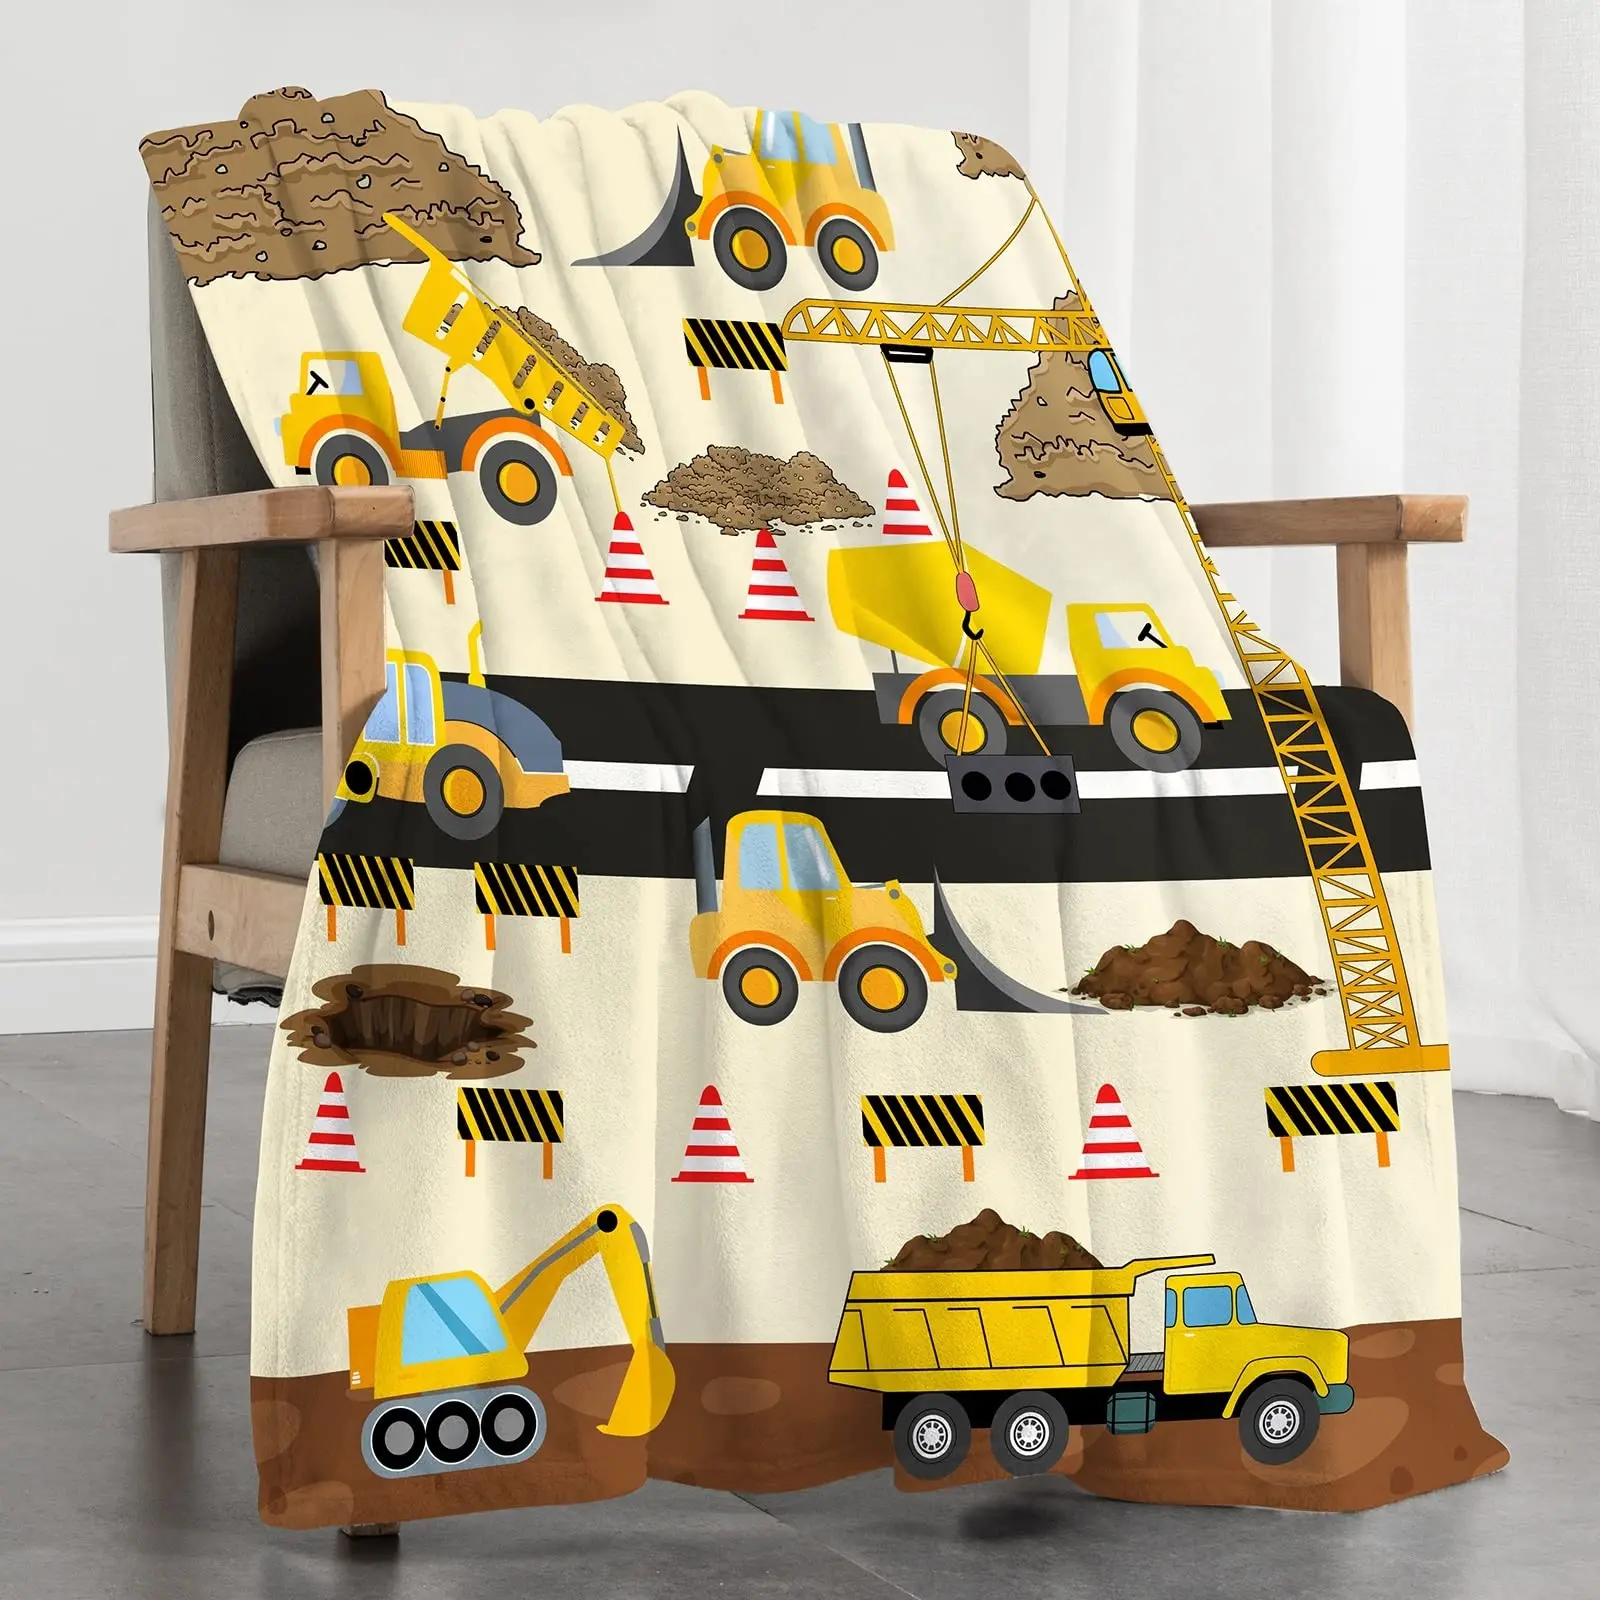 

Trucks Blanket,Soft Flannel Construction Vehicle Throw Blankets for Teens, Cozy Warm Quilt Blanket for Couch Bed, Birthday Gifts